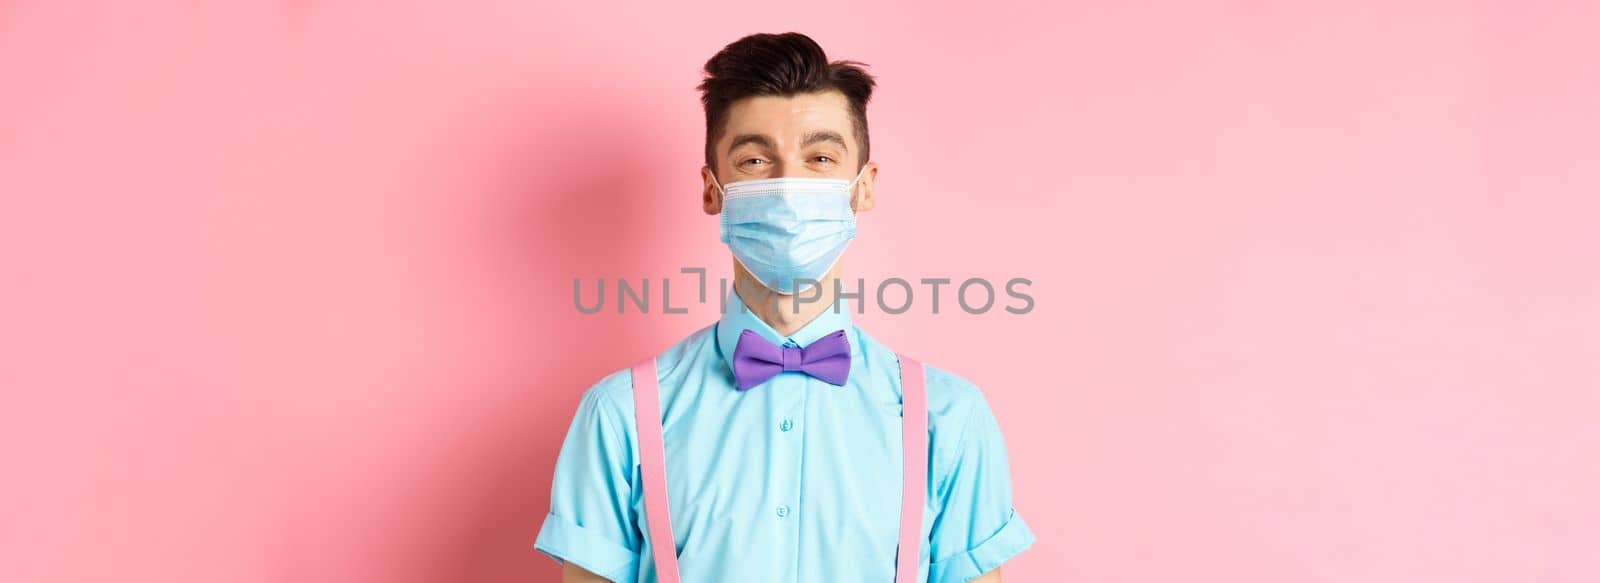 Covid-19, pandemic and health concept. Portrait of smiling man in medical mask feeling happy, standing in festive bow-tie and suspenders, pink background by Benzoix